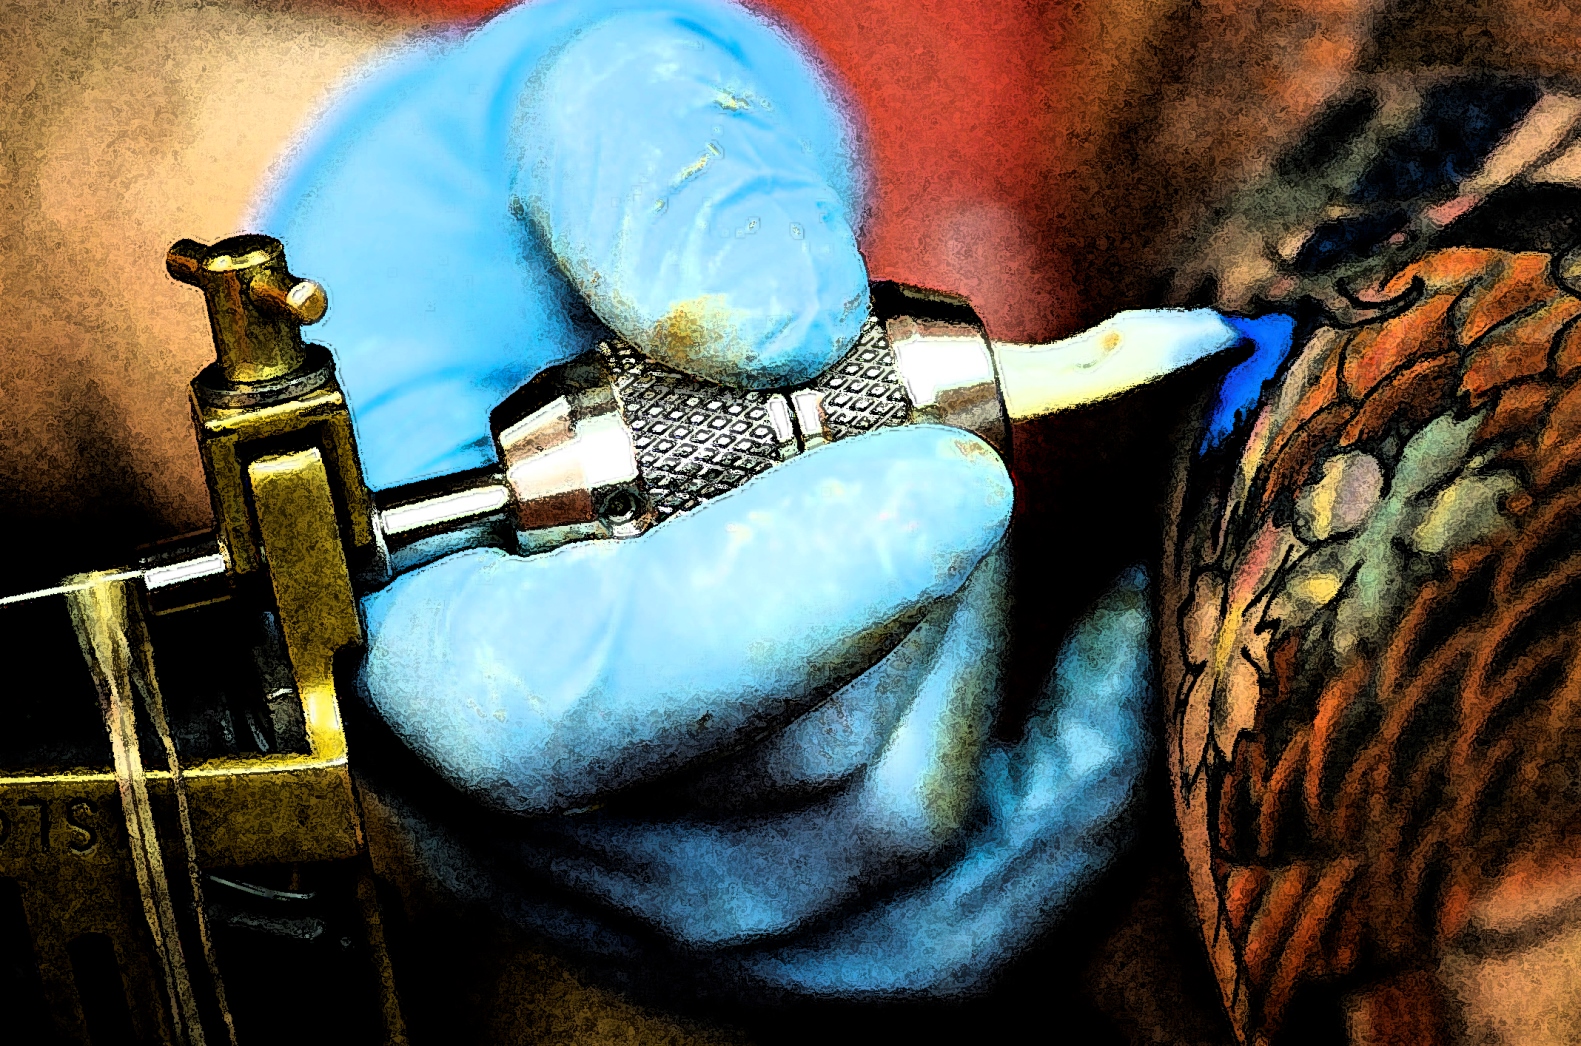 Former gang members, trafficking victims escape dangerous past with free branding  tattoo removal | Here & Now